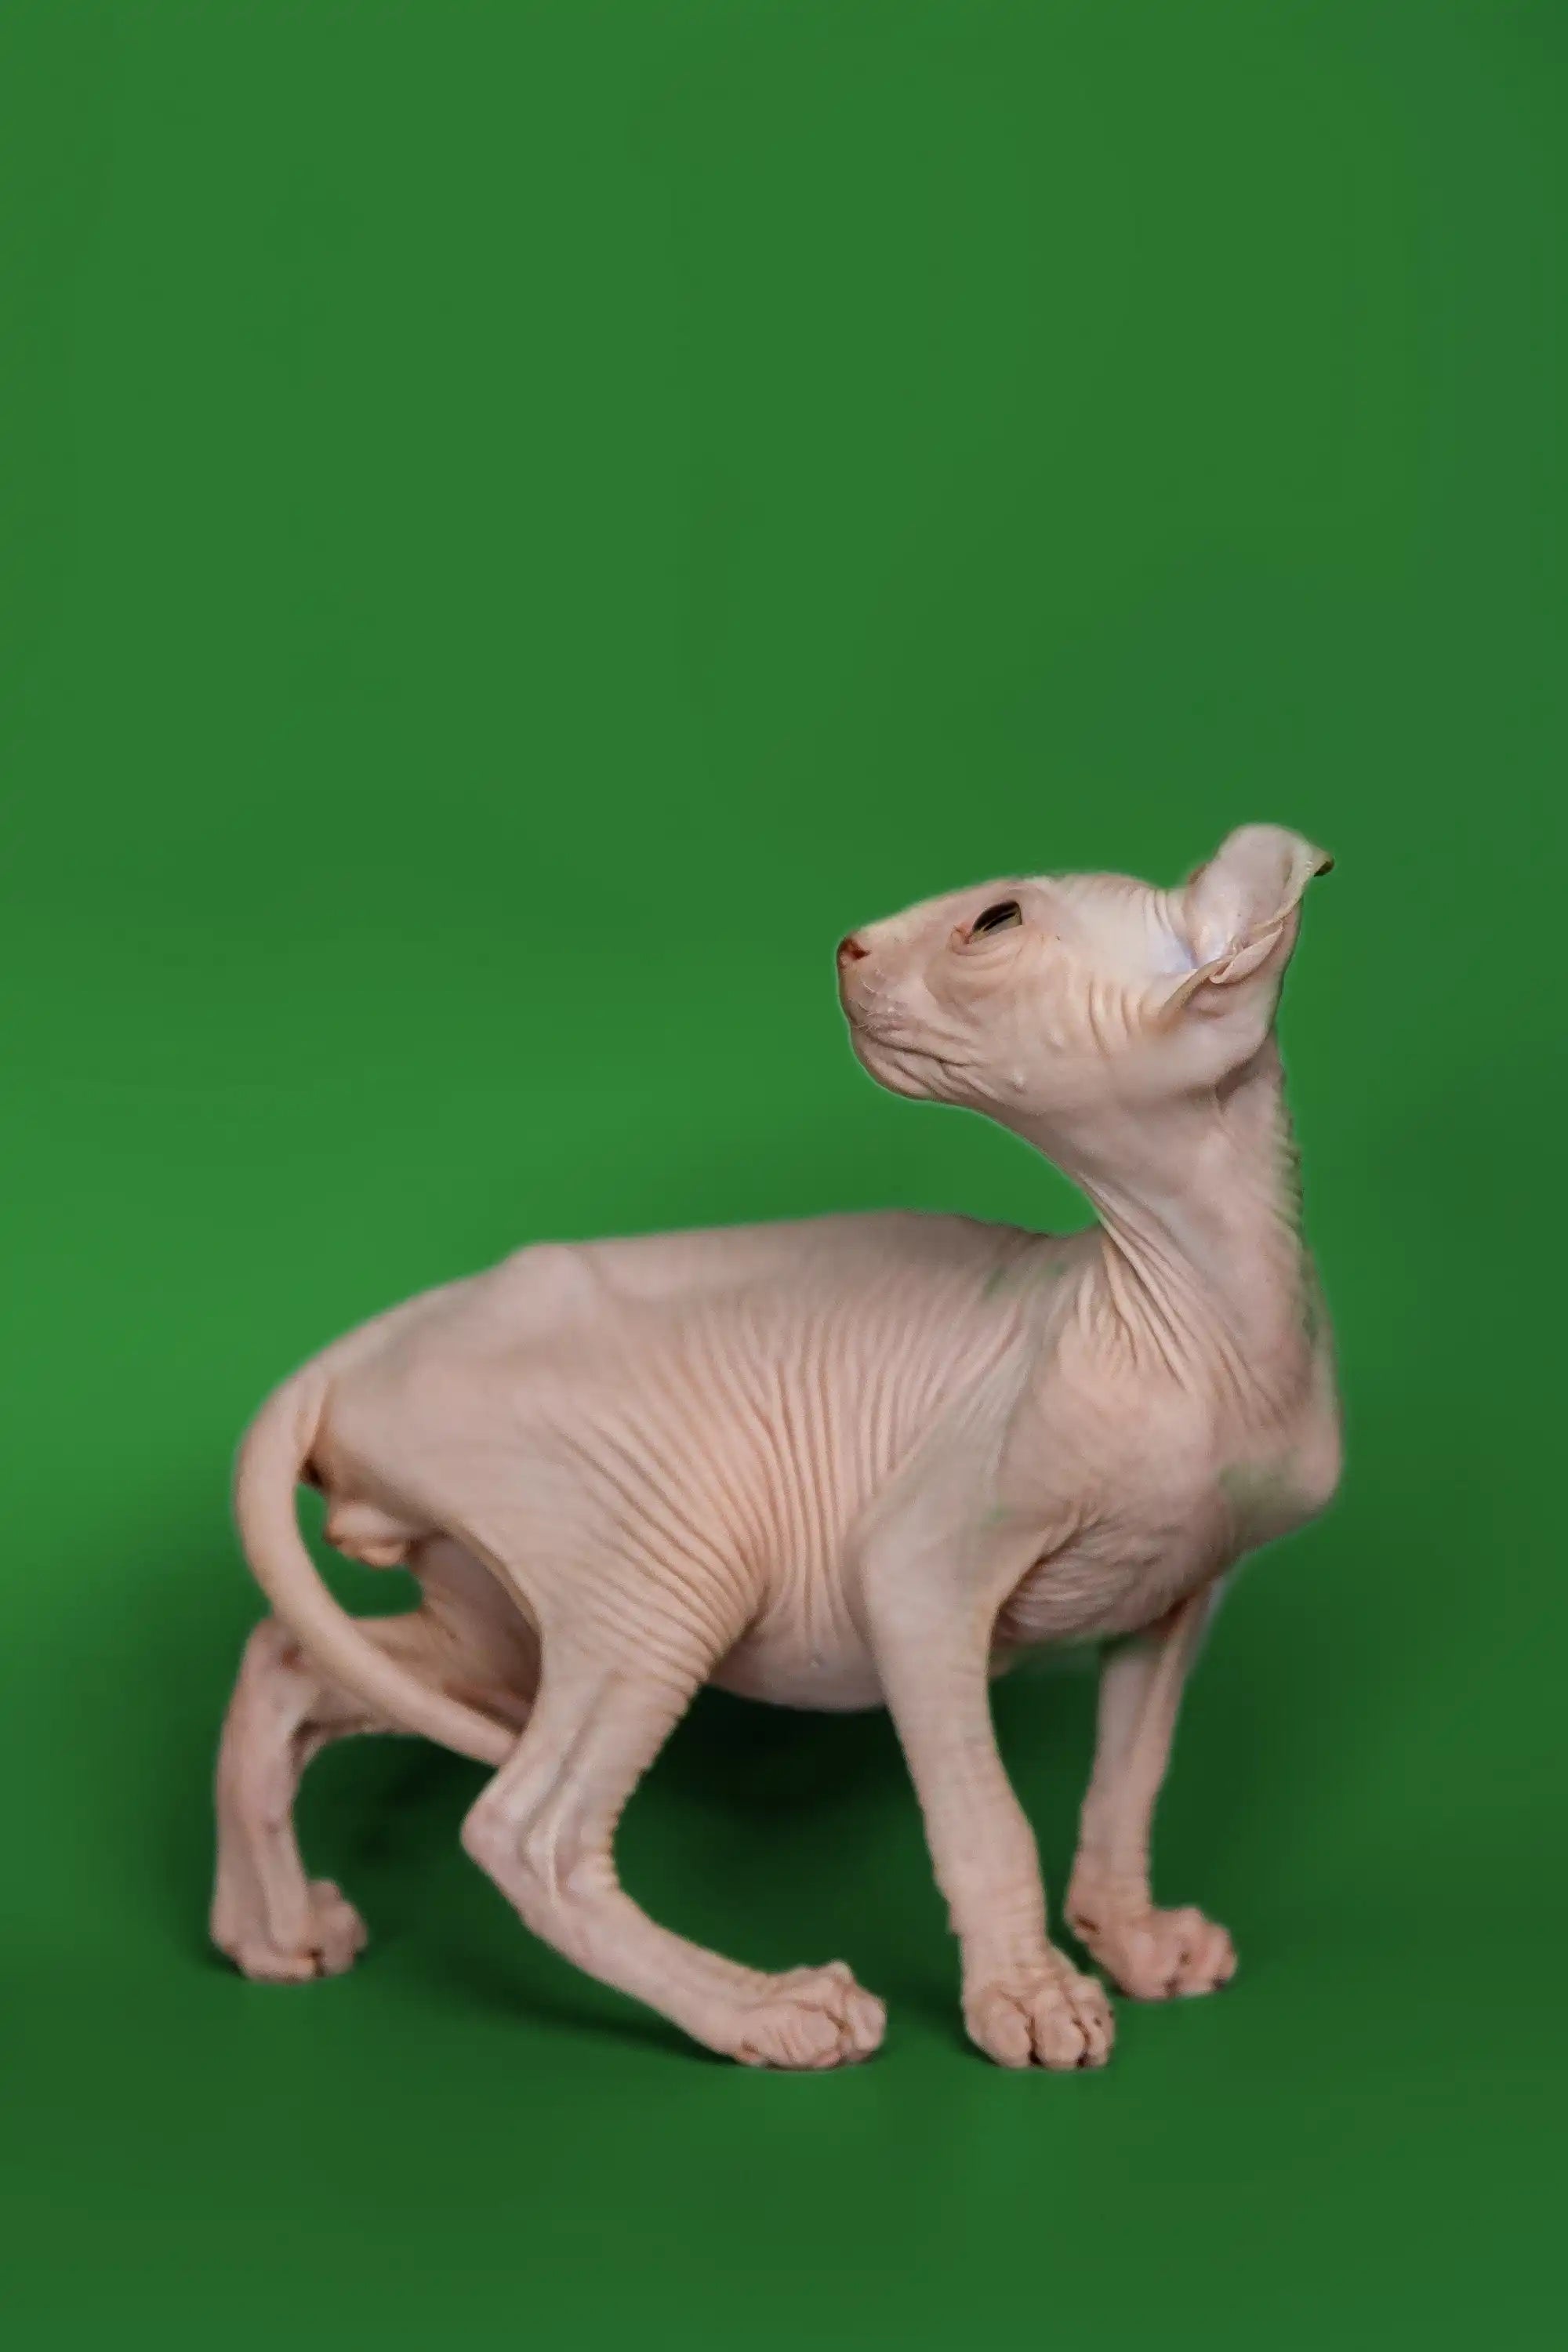 Sphynx Cats and Kittens for Sale Marco | Elf Kitten